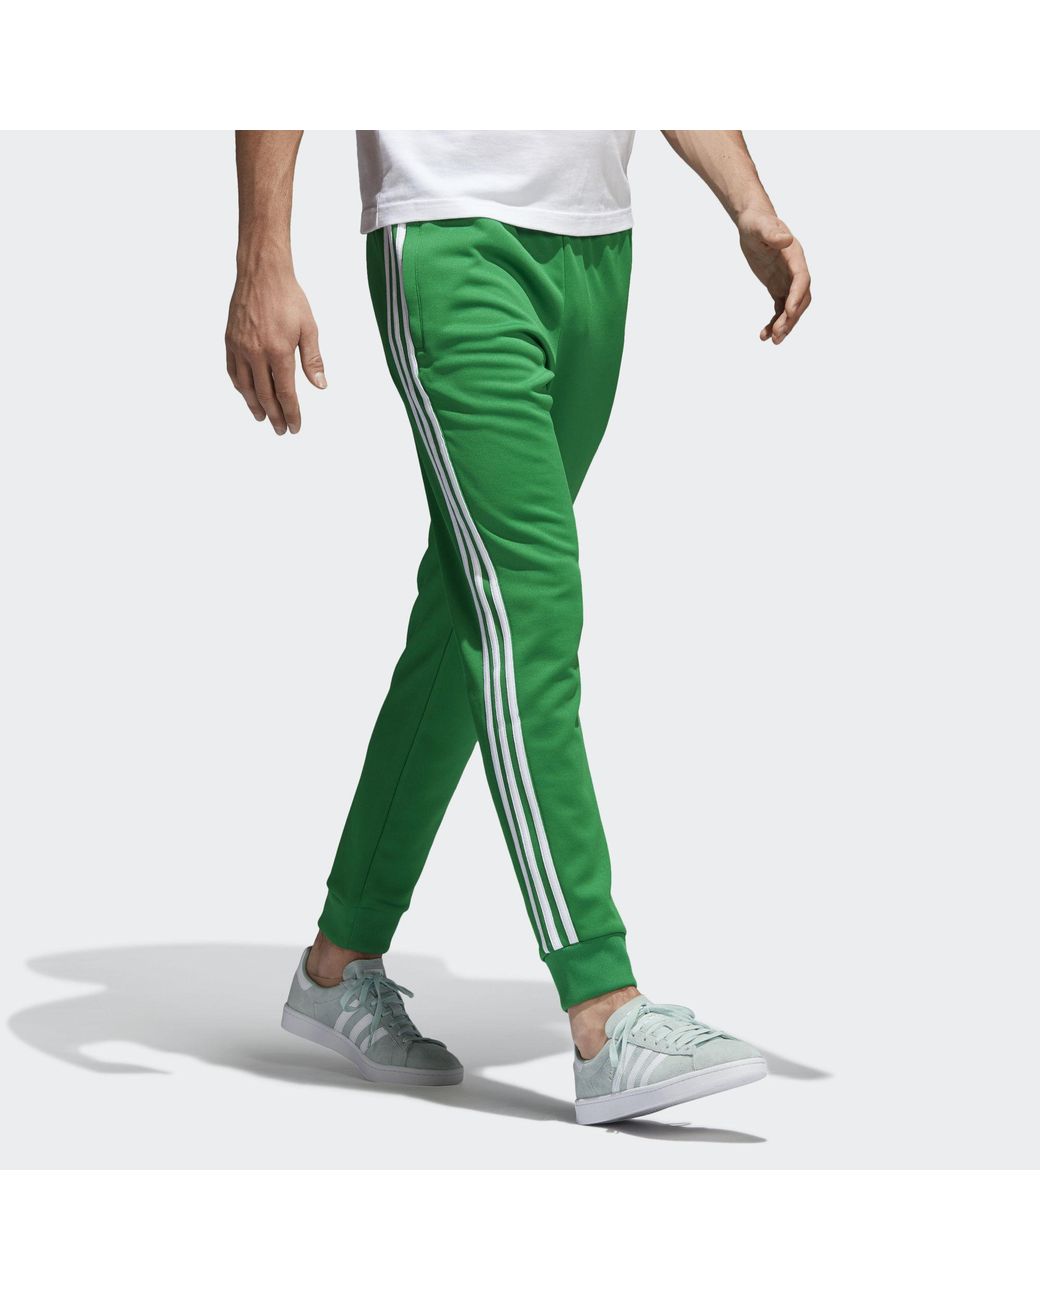 adidas Originals Sst Track Pants in Green for | Lyst